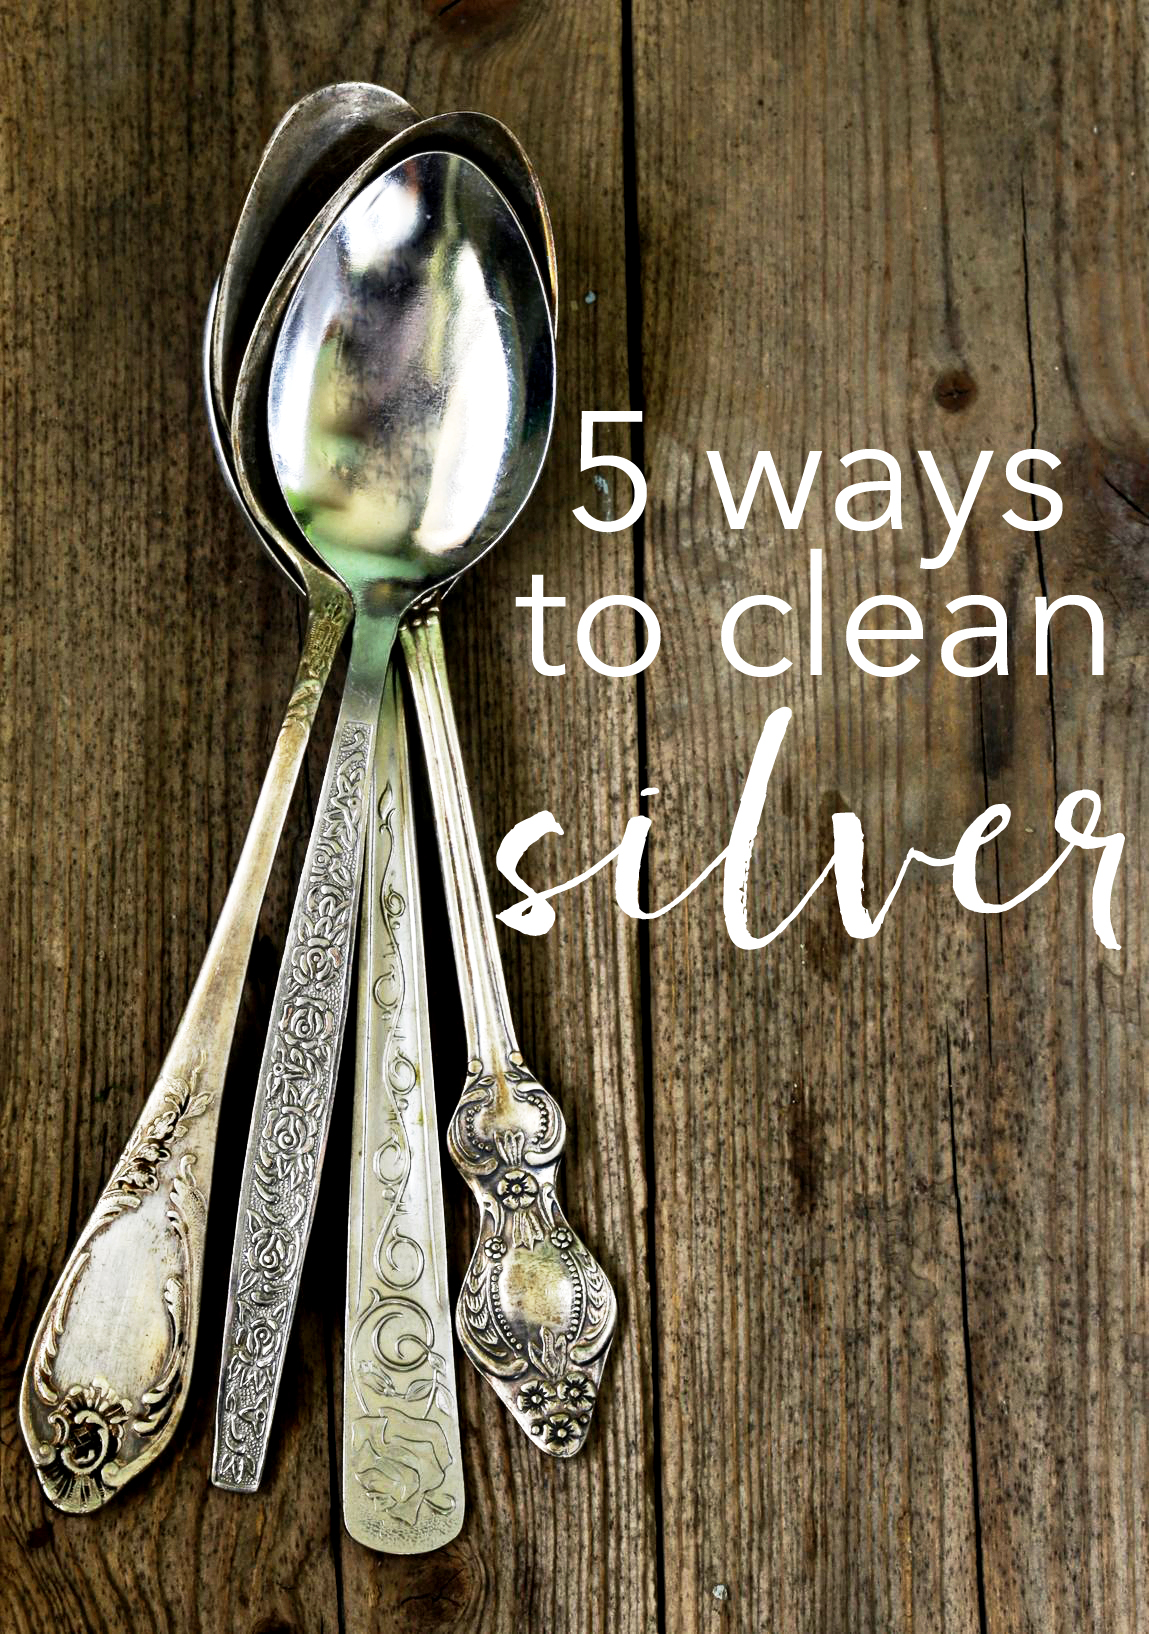 How to clean silver (5 tricks that work with things you have!)